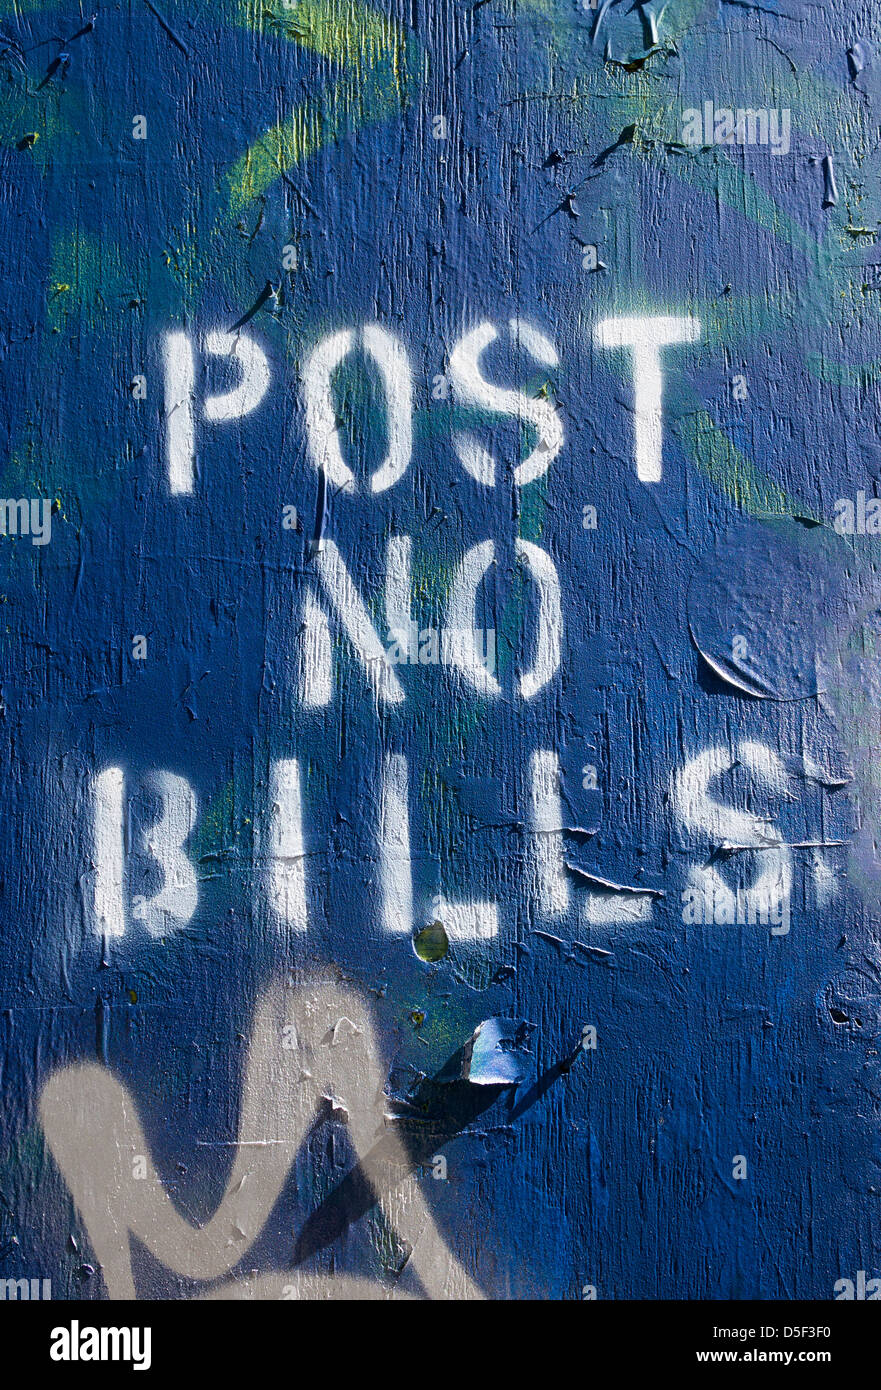 Post No Bills sign on a construction site Stock Photo